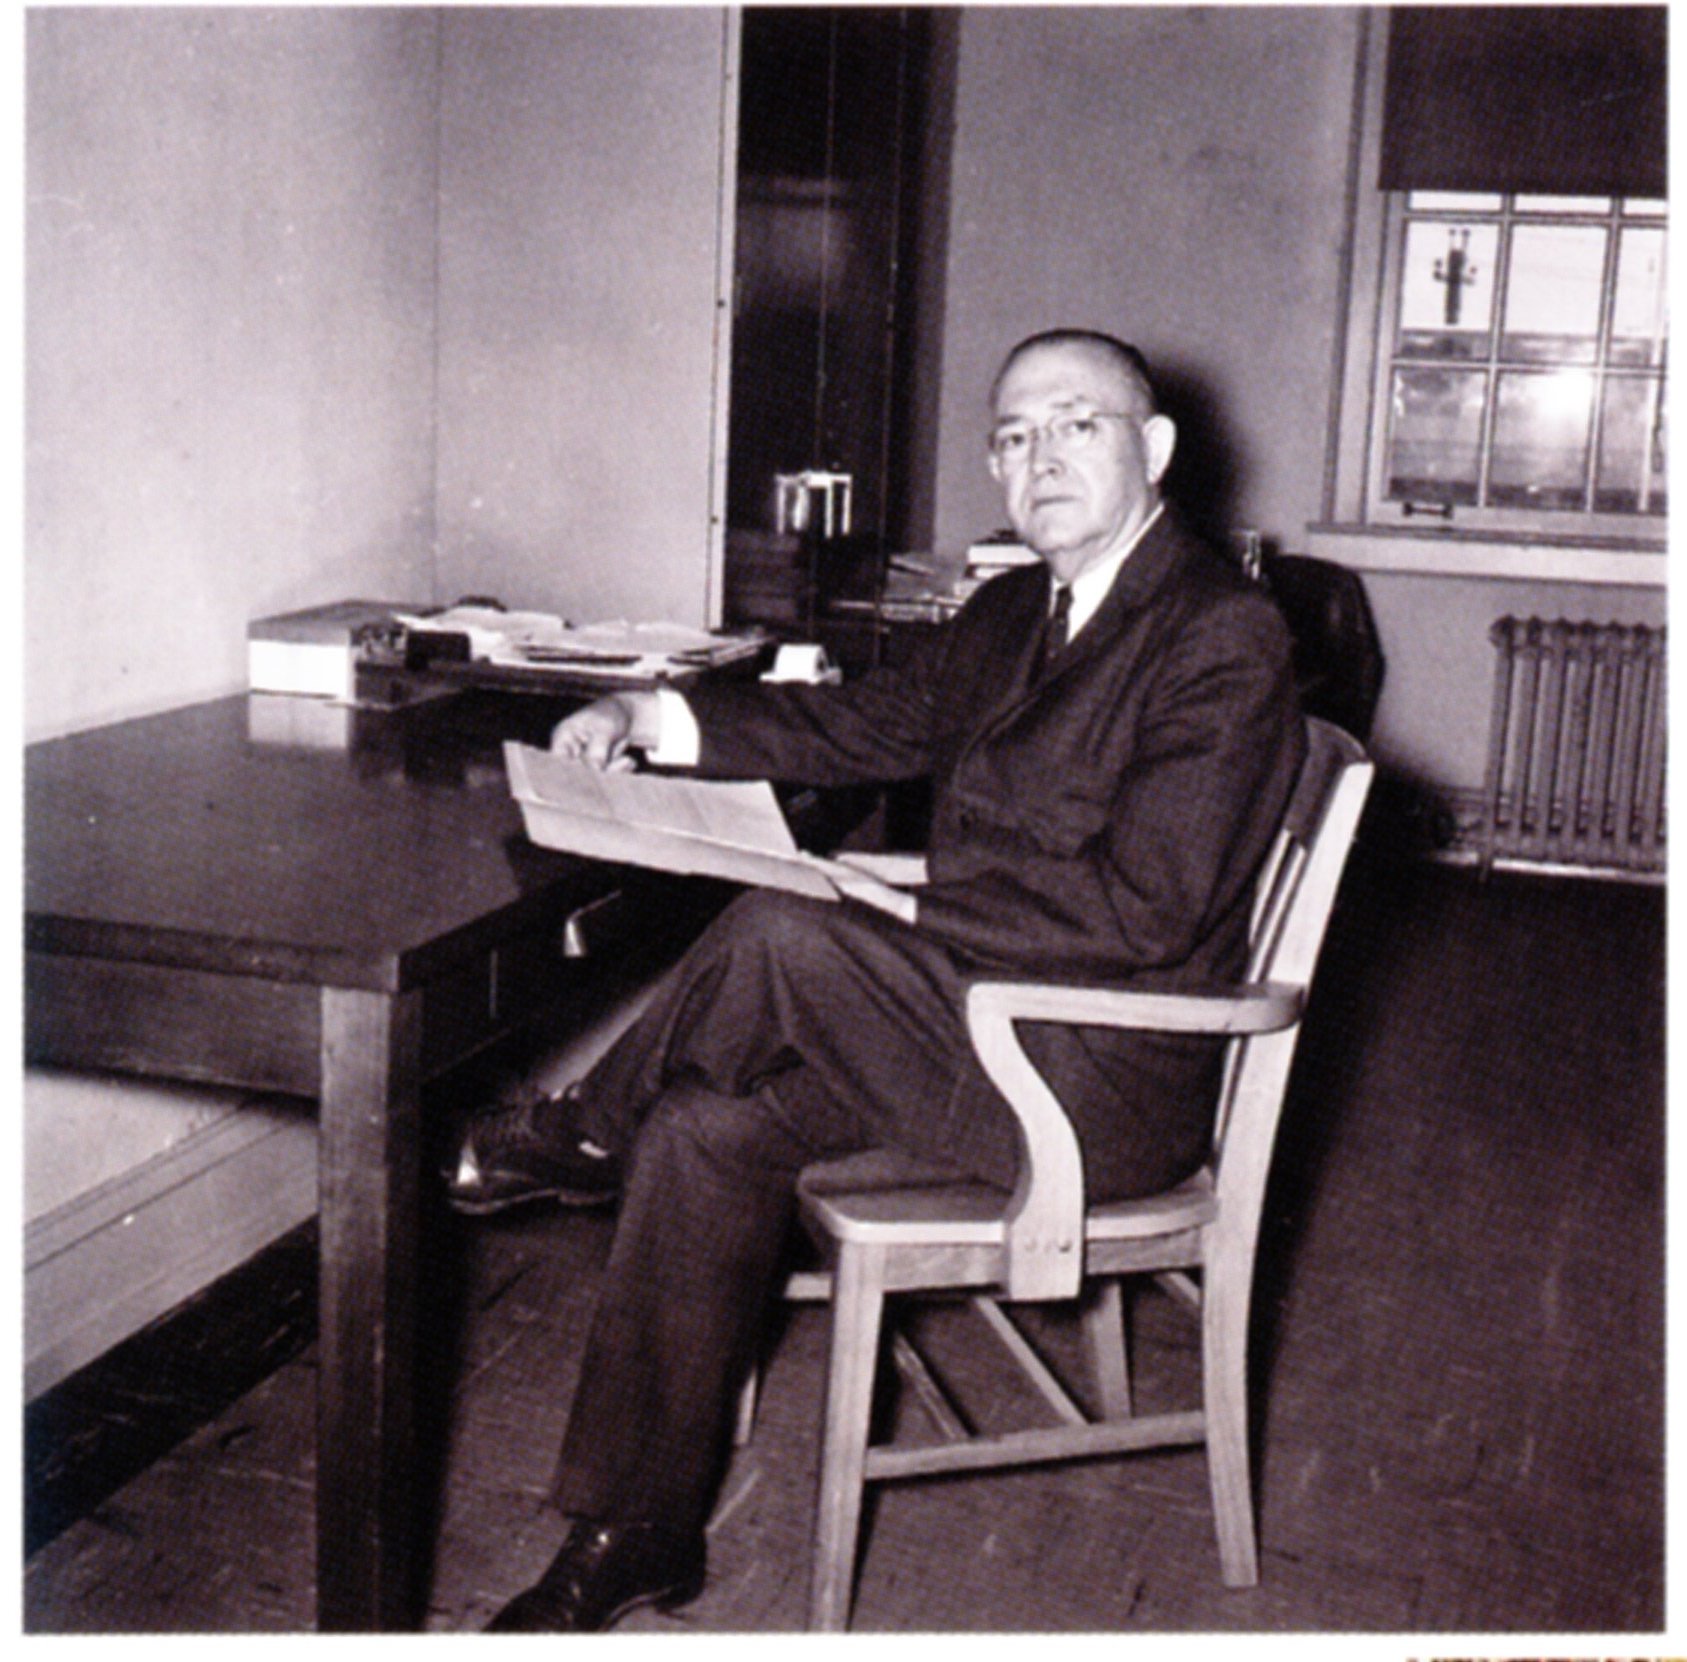 TJ Farr sitting as his desk in a black and white photo